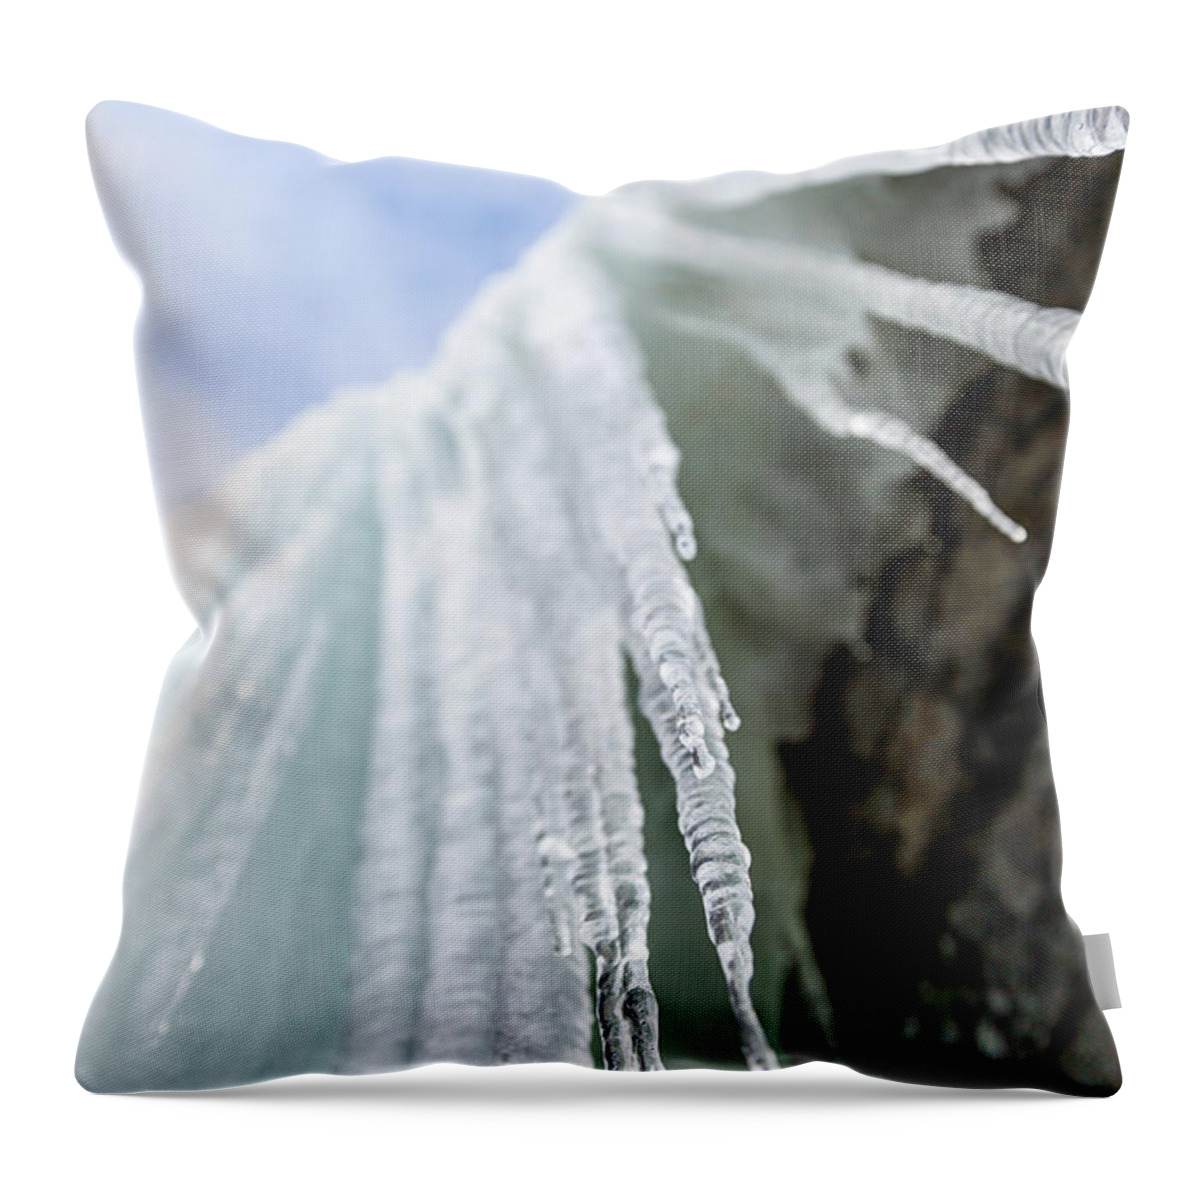 Winter Throw Pillow featuring the photograph Winter At The Waterfall by Andreas Levi